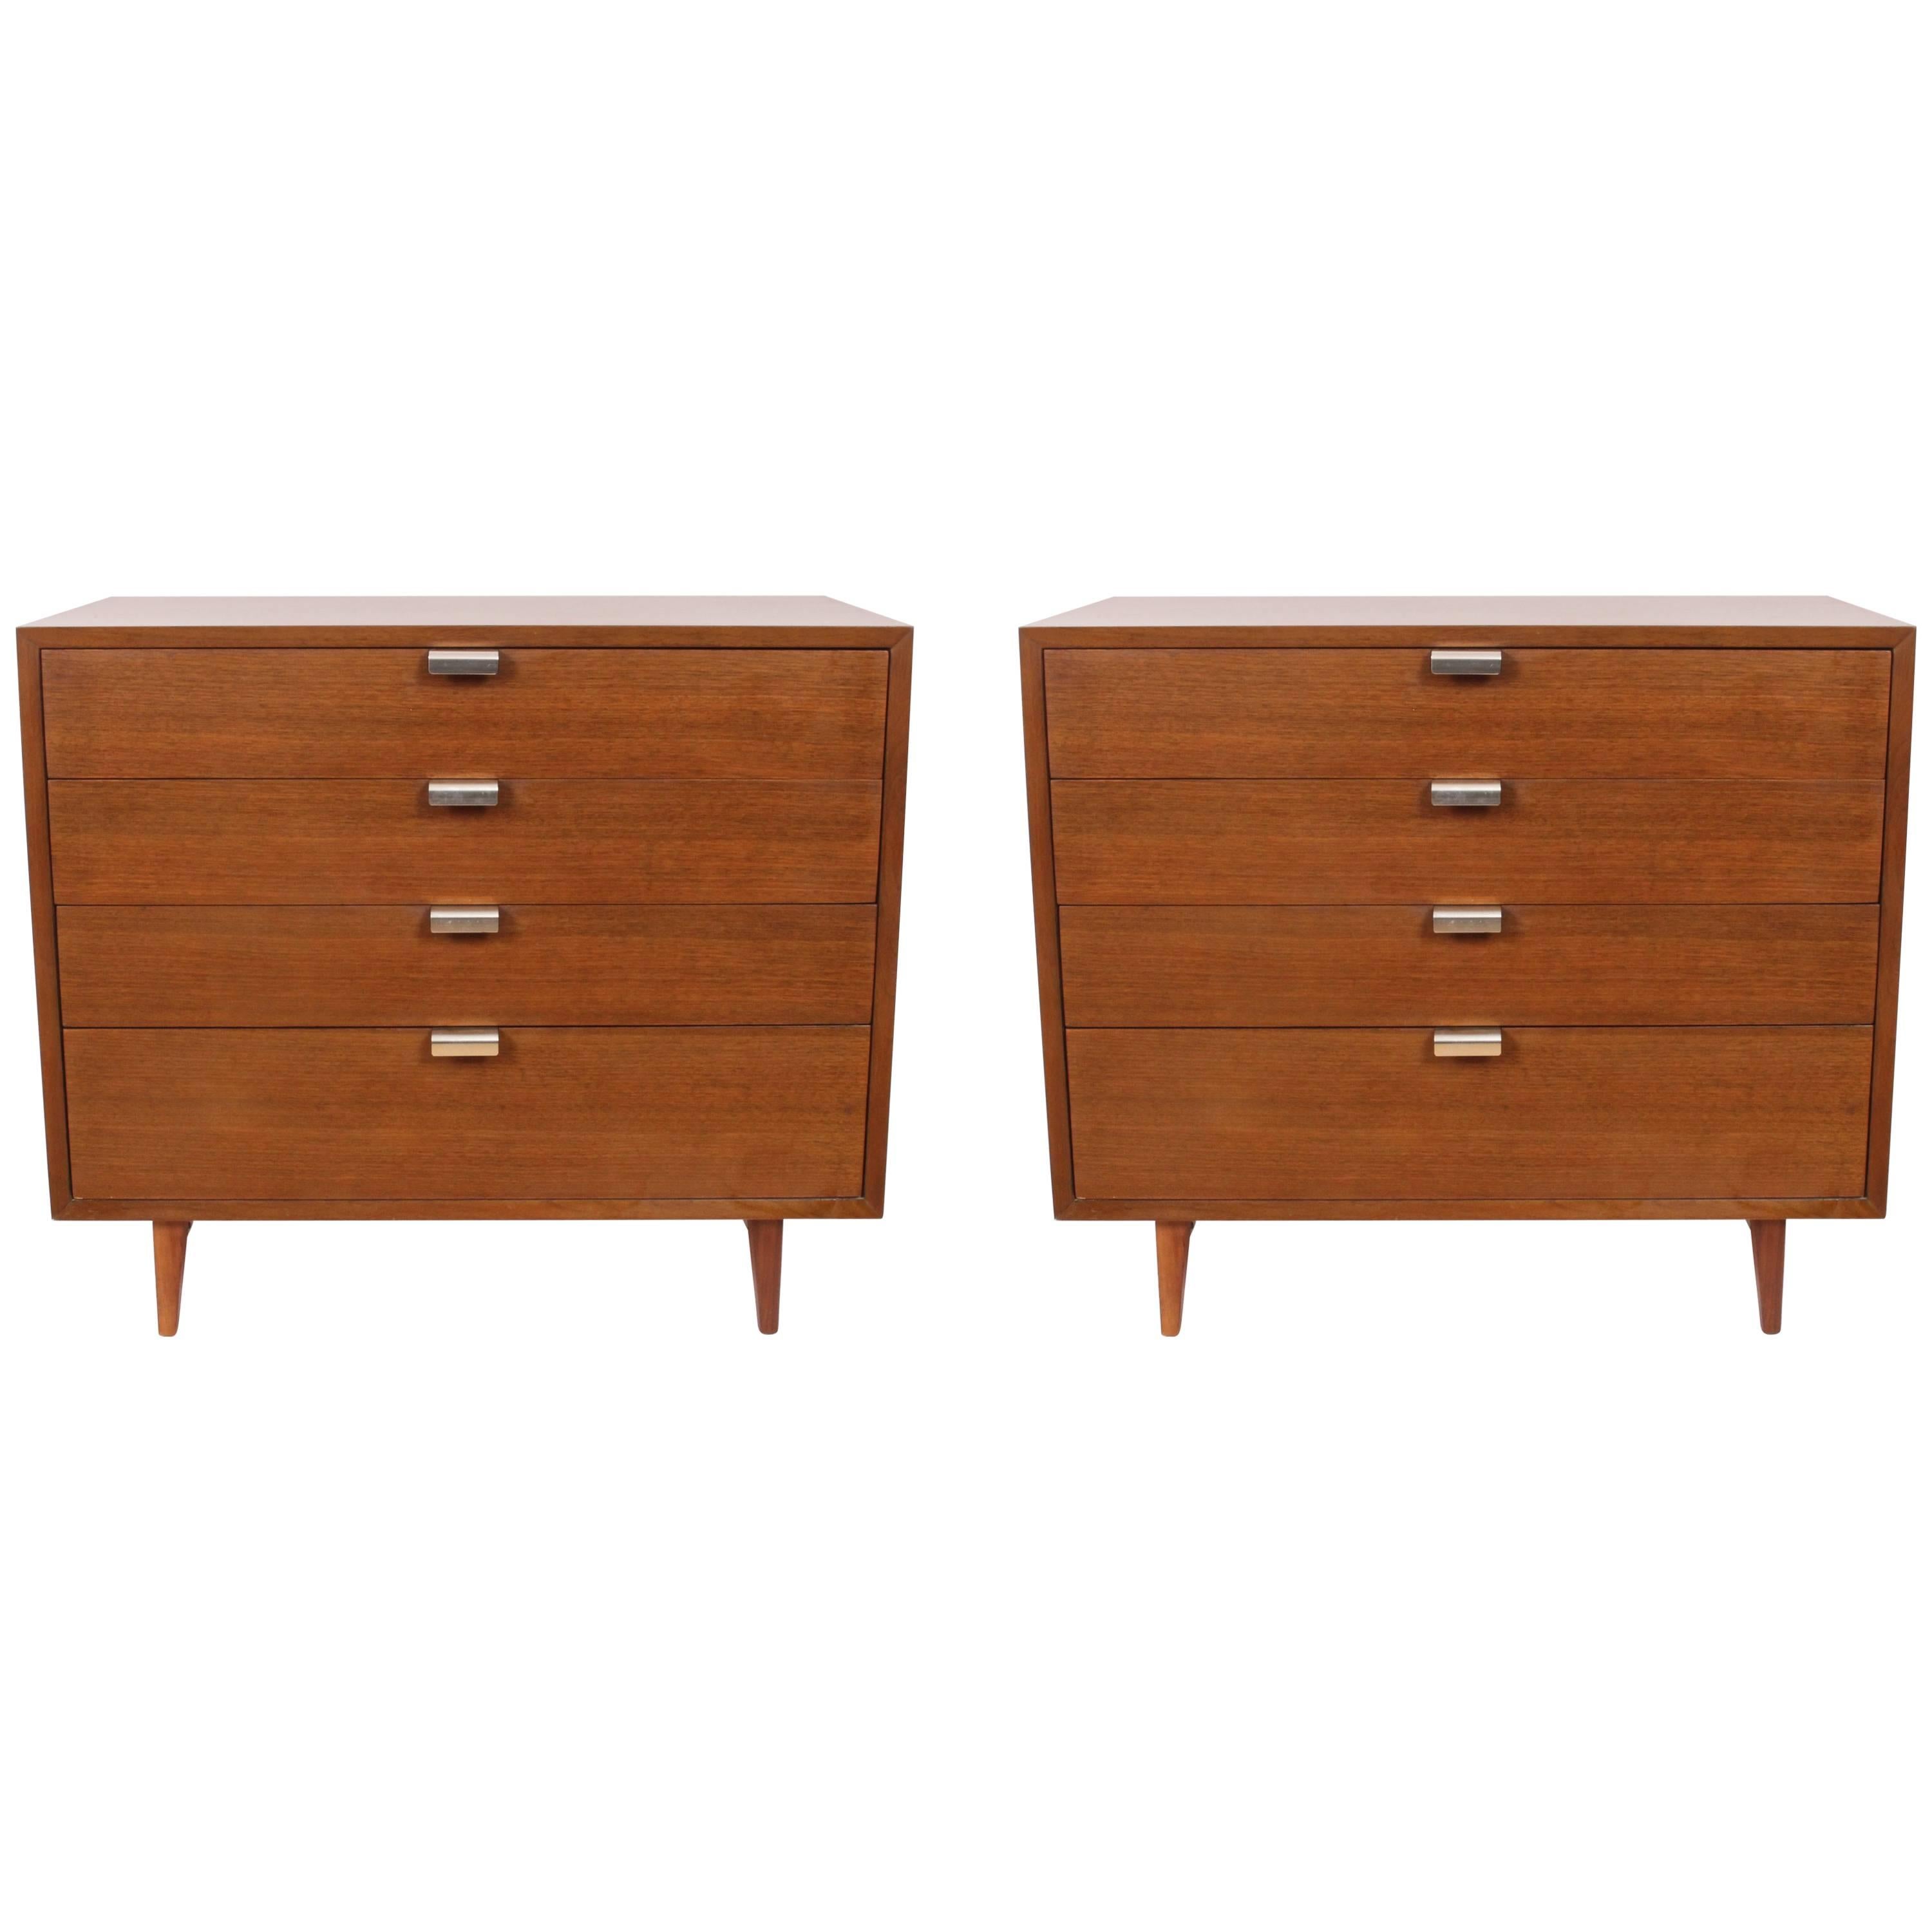 Pair of George Nelson for Herman Miller Four-Drawer Walnut Dressers with J Pulls